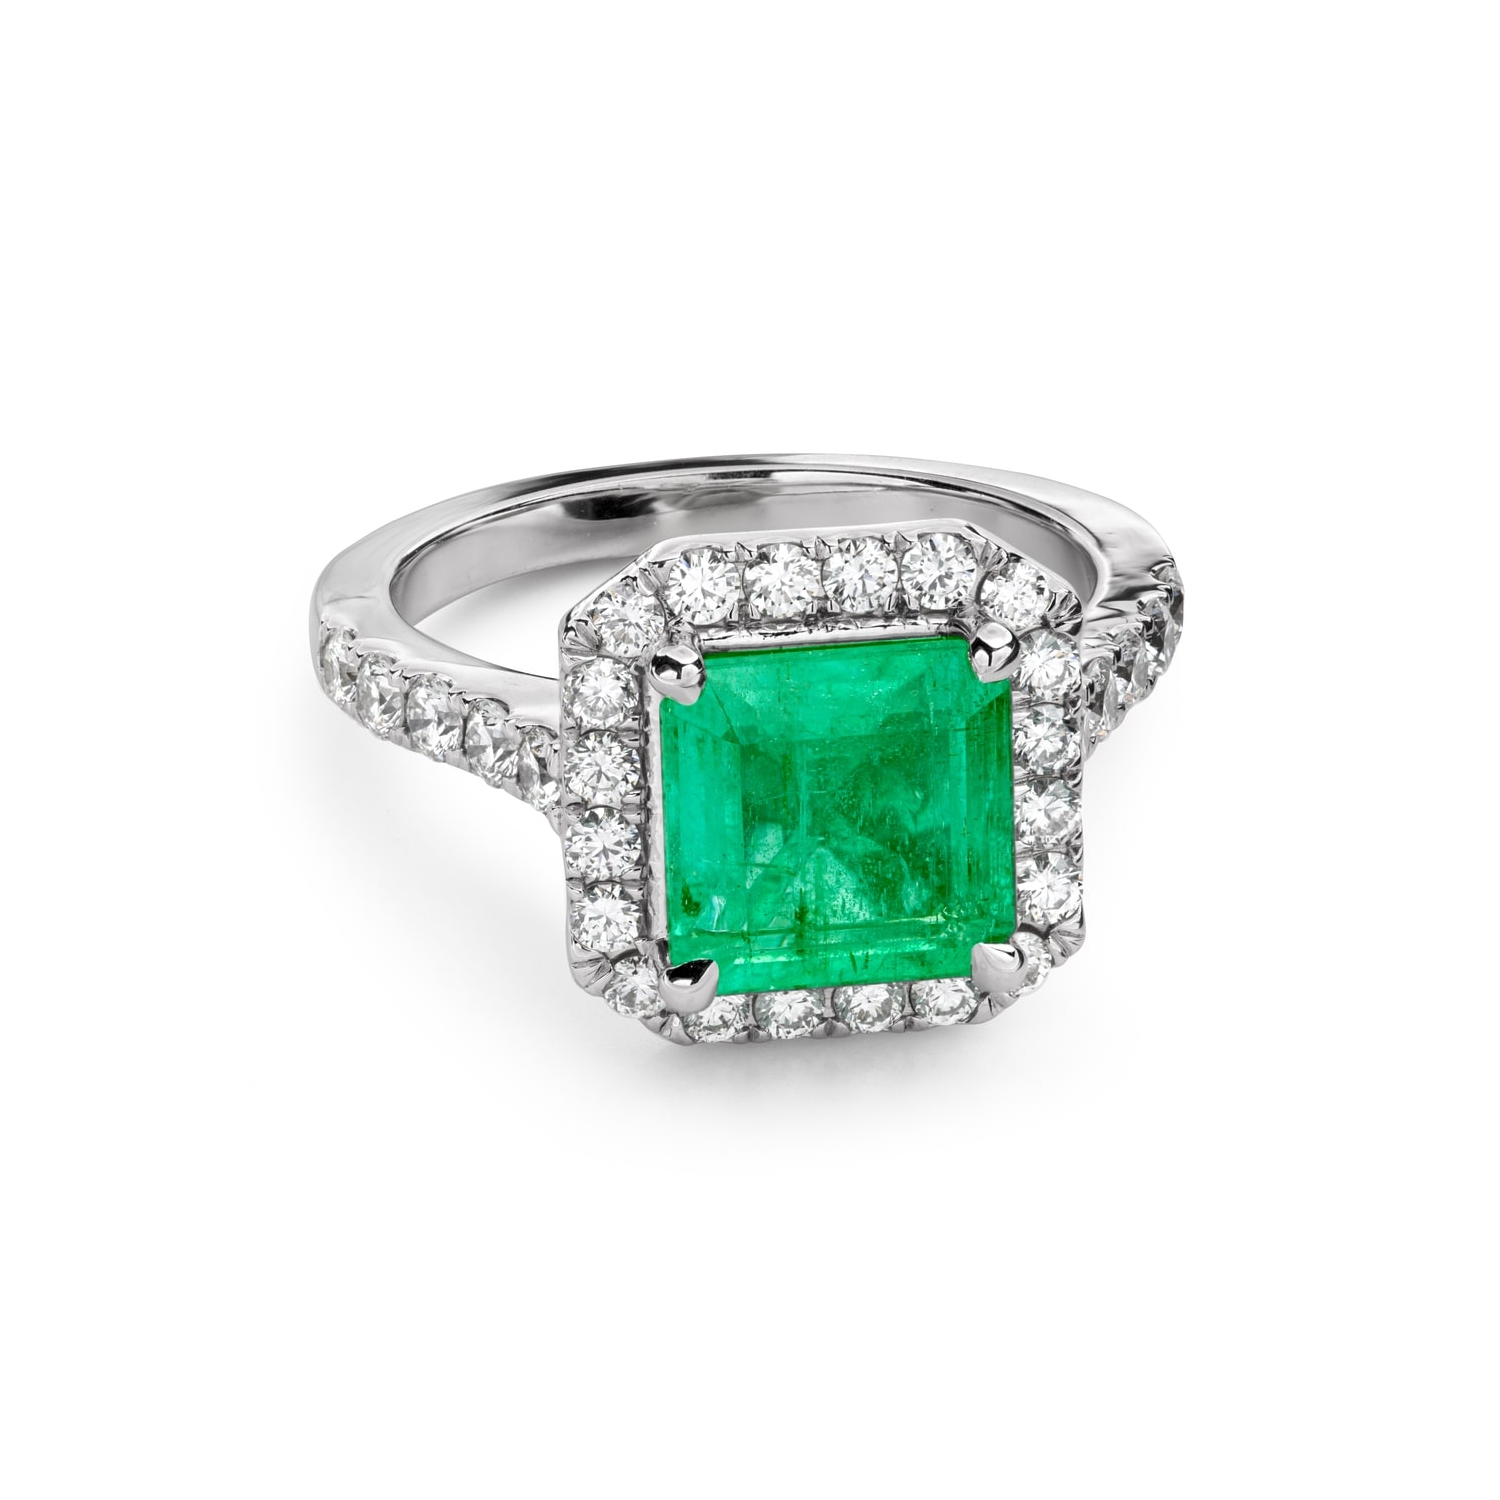 Engagement ring with gemstones "Emerald 52"